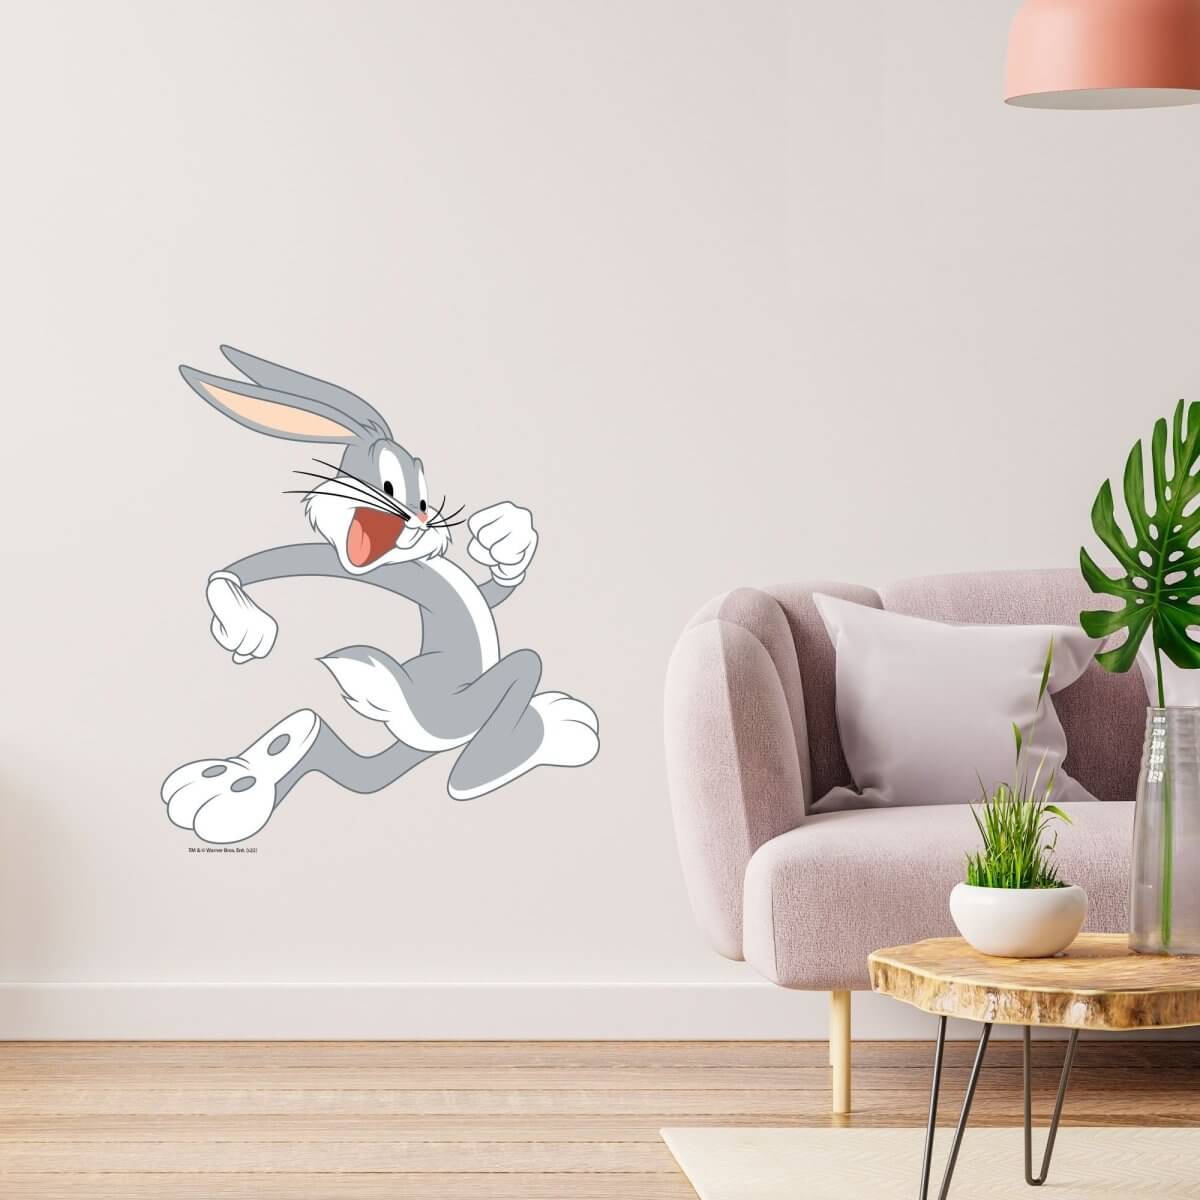 Kismet Decals Looney Tunes Bugs Bunny Escape Licensed Wall Sticker - Easy DIY Home & Kids Room Decor Wall Decal Art - Kismet Decals